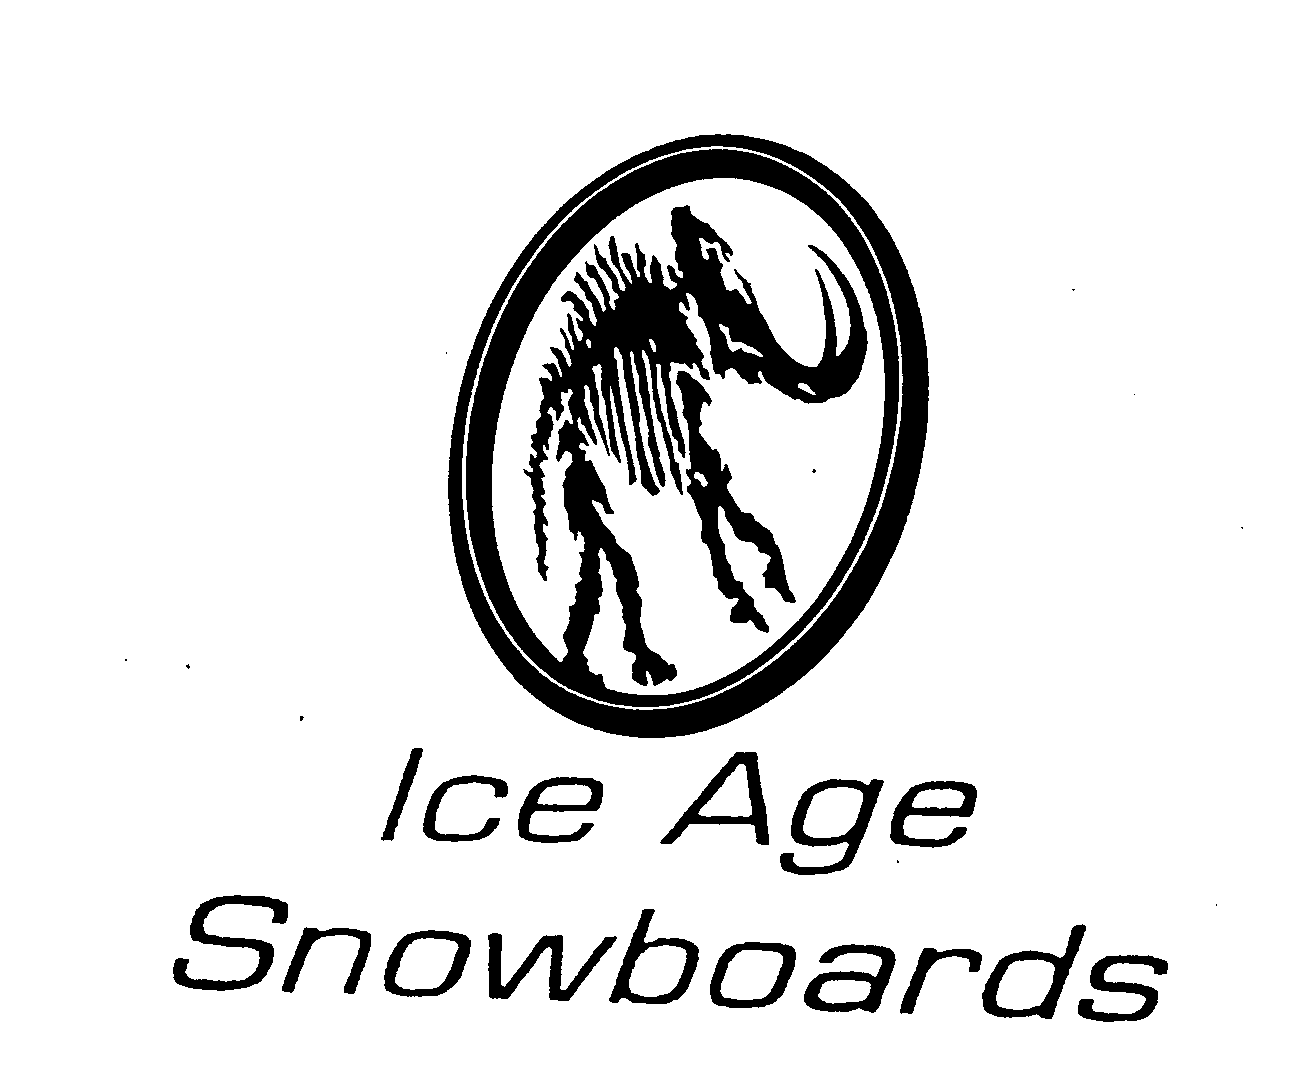  ICE AGE SNOWBOARDS